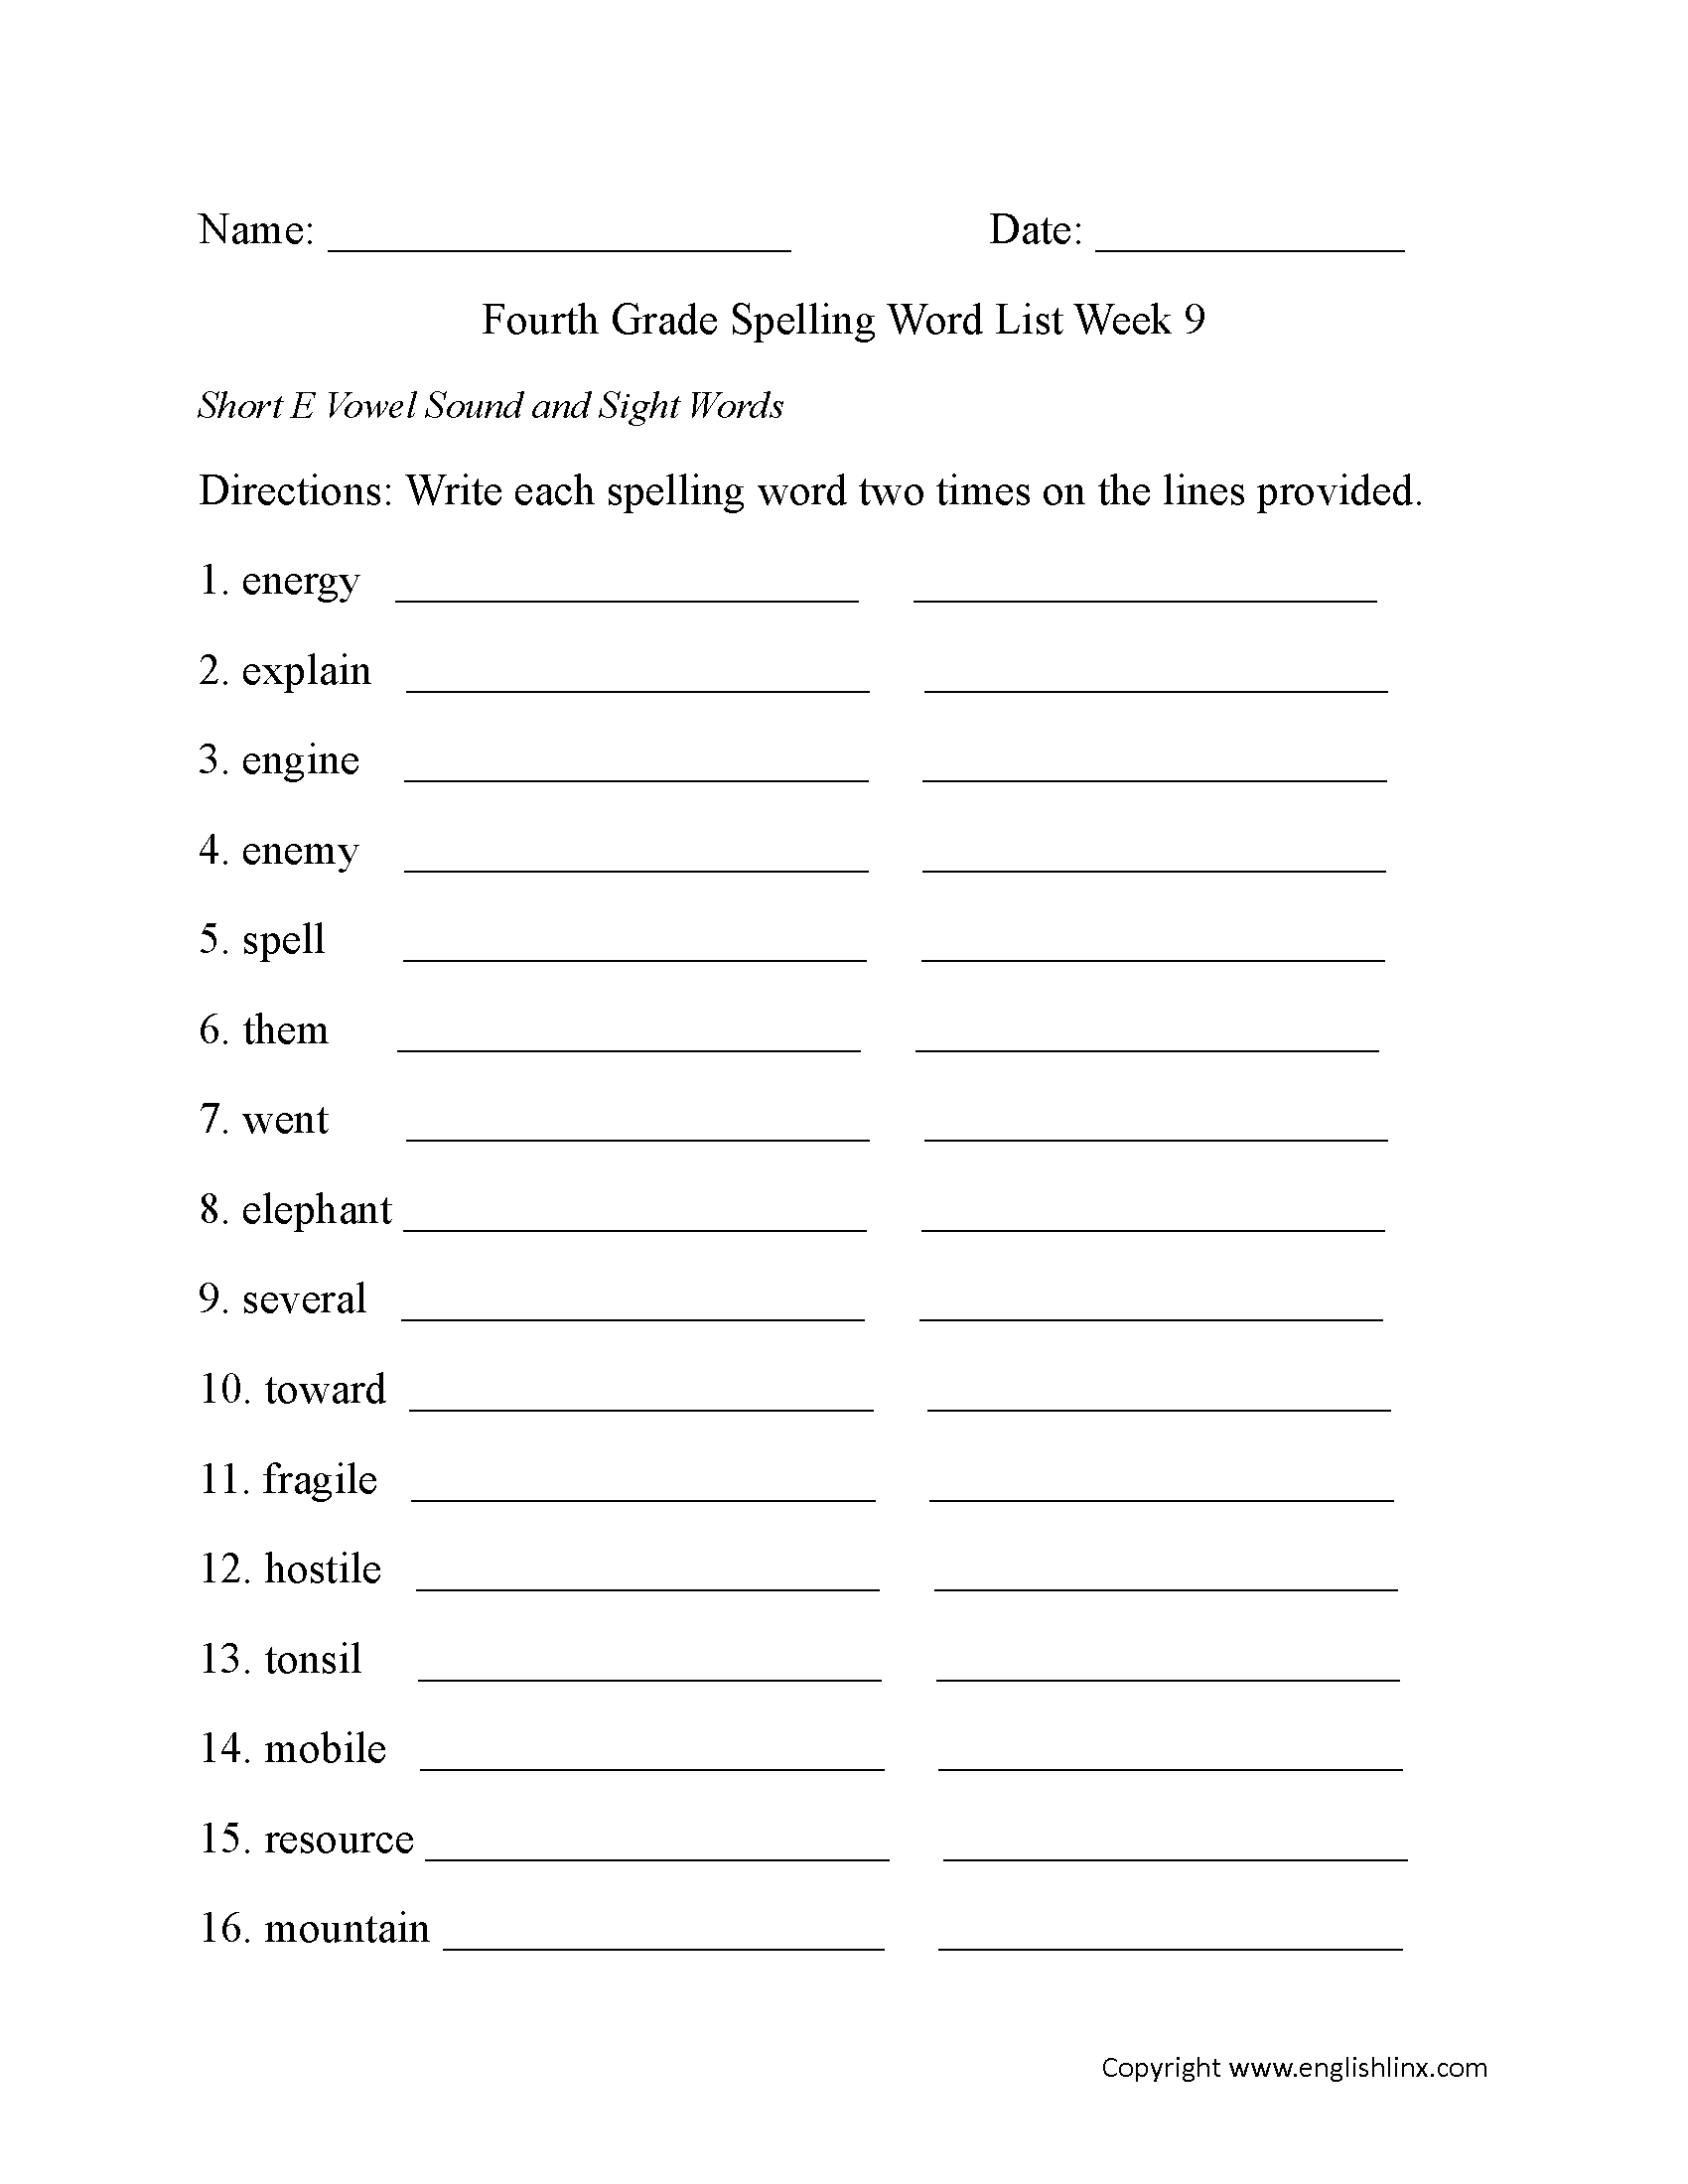 Week 9 Short E Vowel and Sight Words Fourth Grade Spelling Words Worksheets